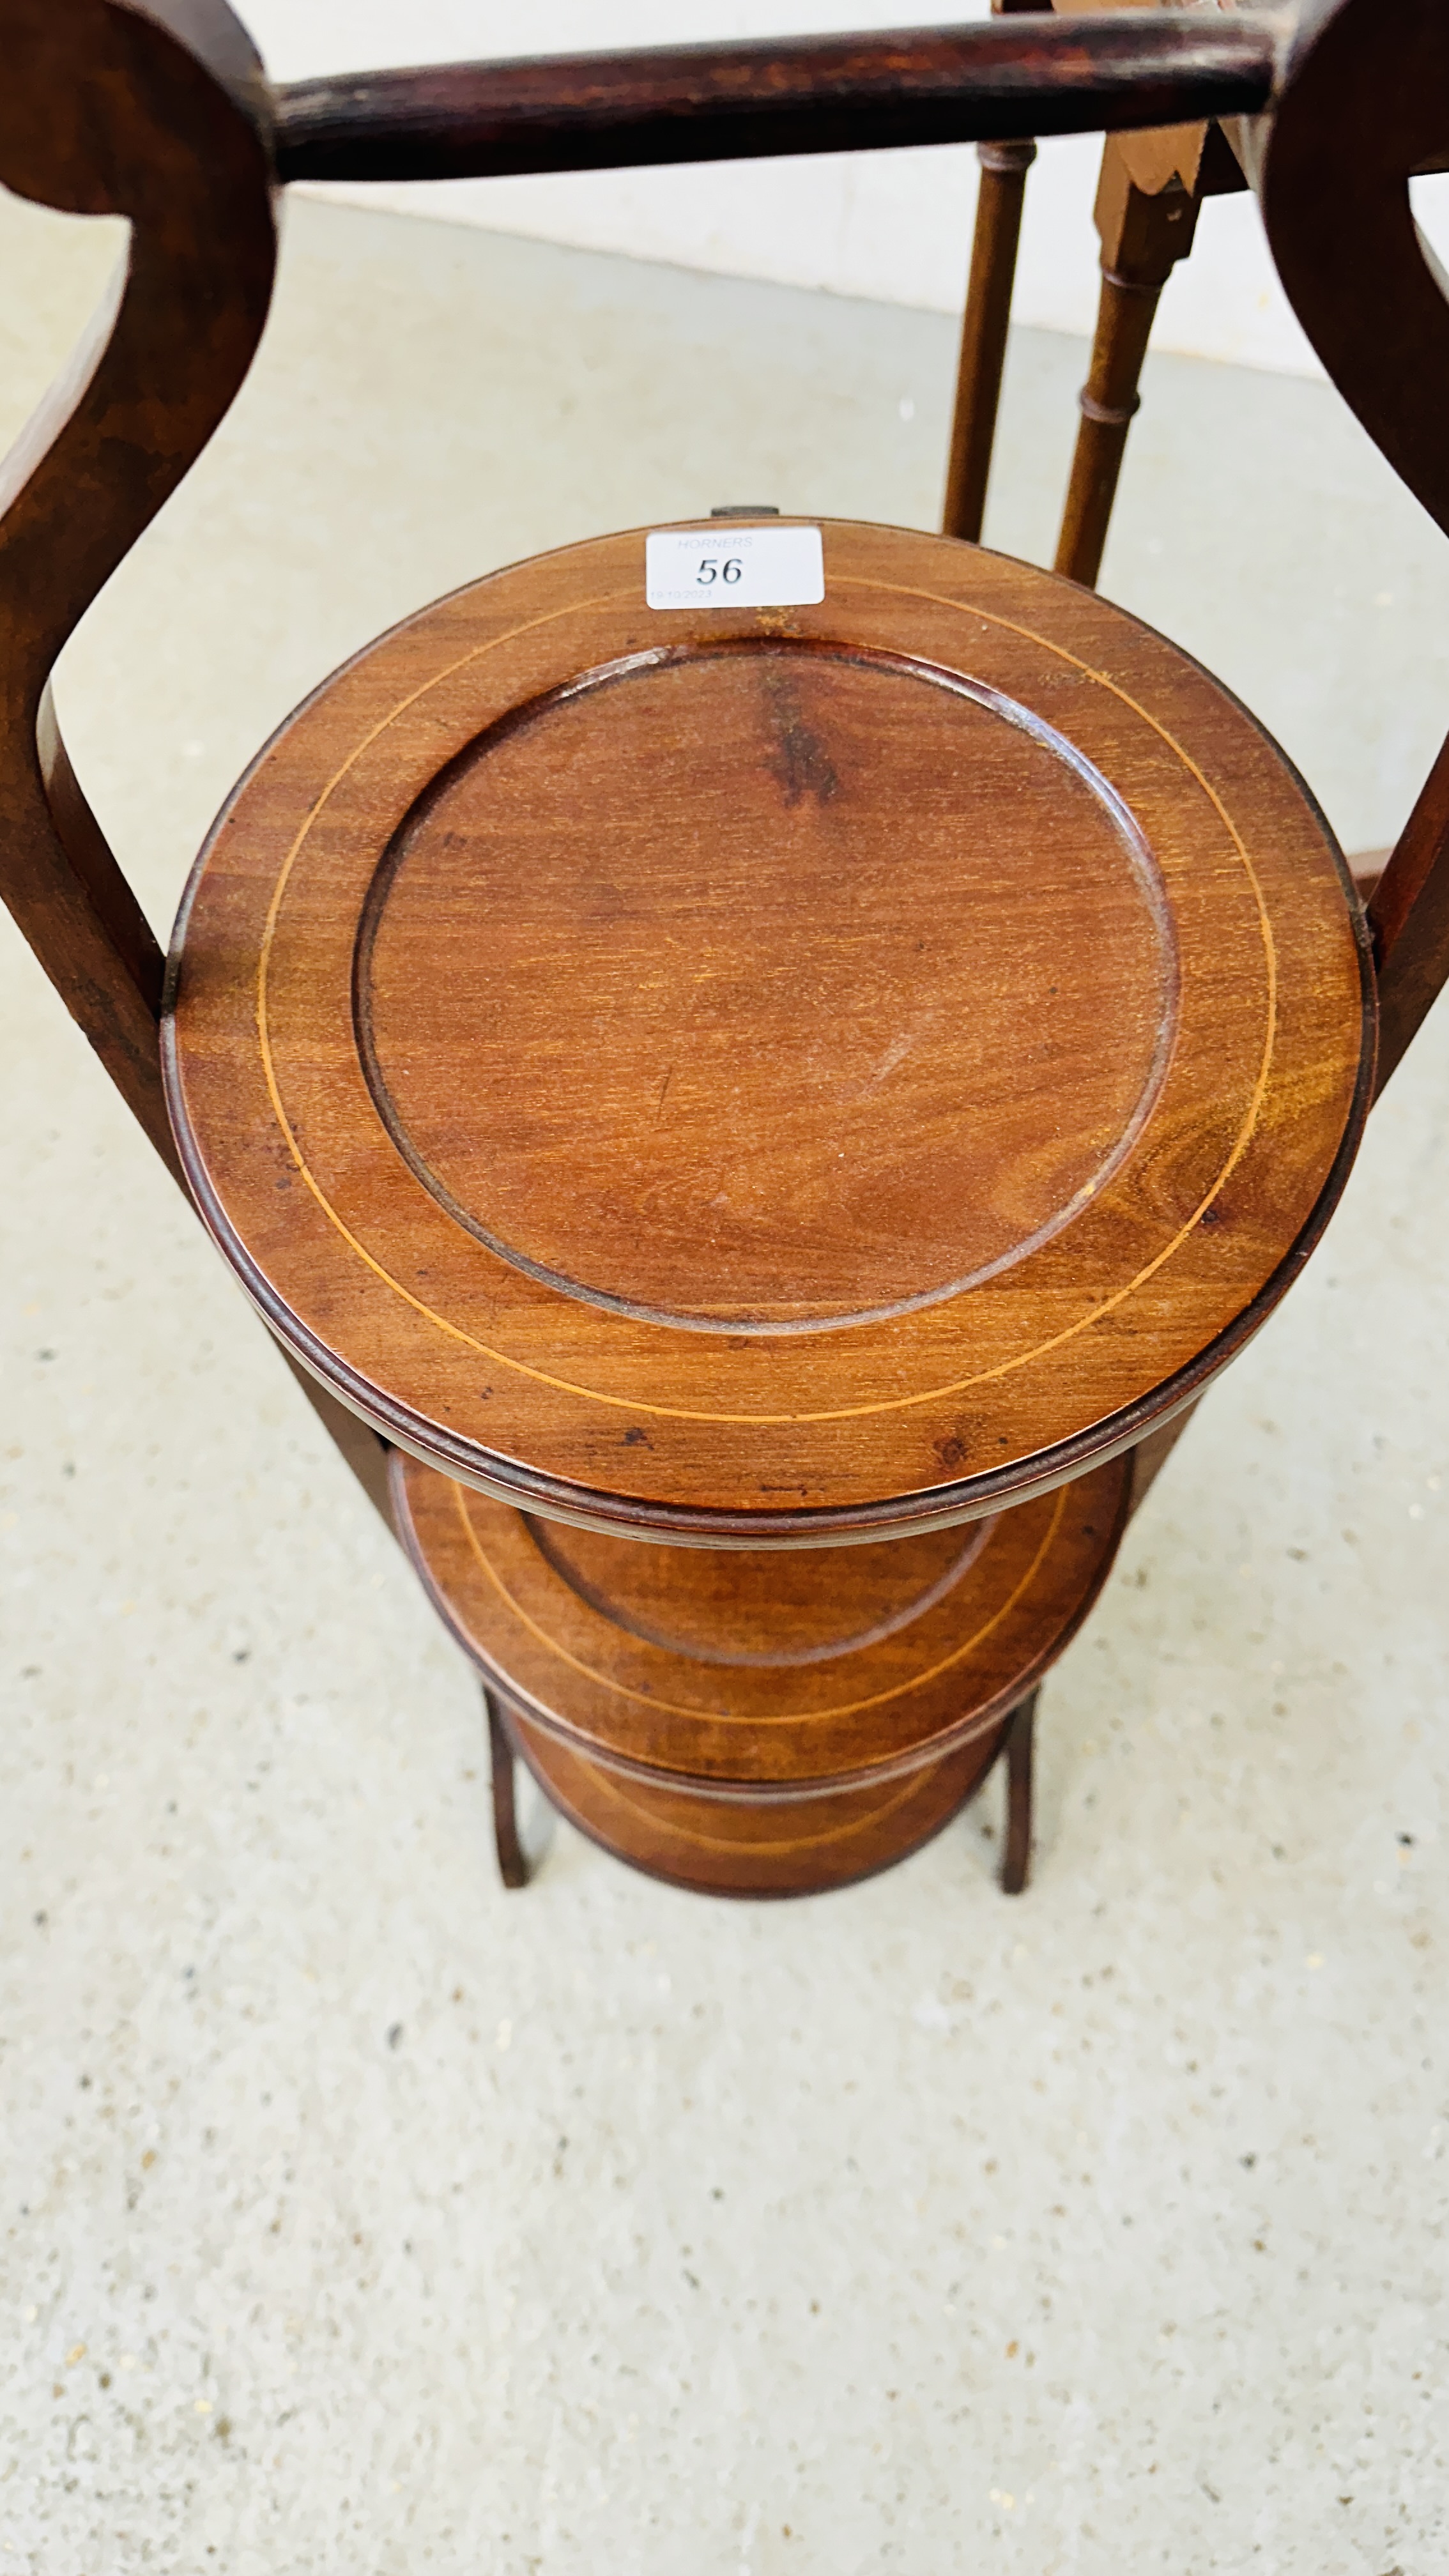 A FOLDING CAKE STAND ALONG WITH MAHOGNY OCCASIONAL TABLE, ONE OF A QUATTETO SET. - Image 3 of 10